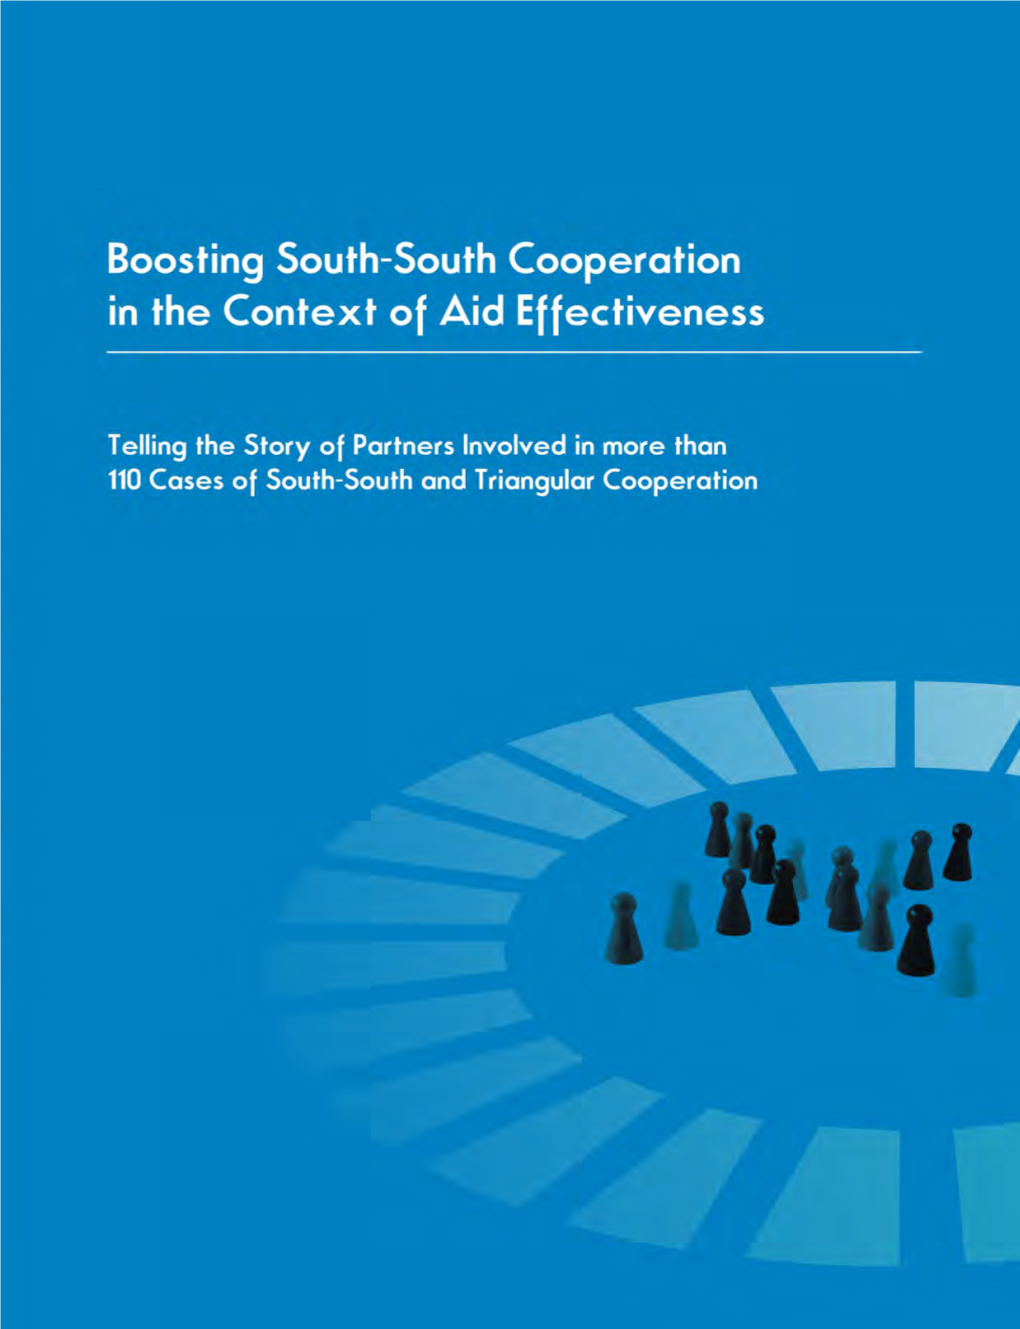 South-South Cooperation in the Context of Aid Effectiveness